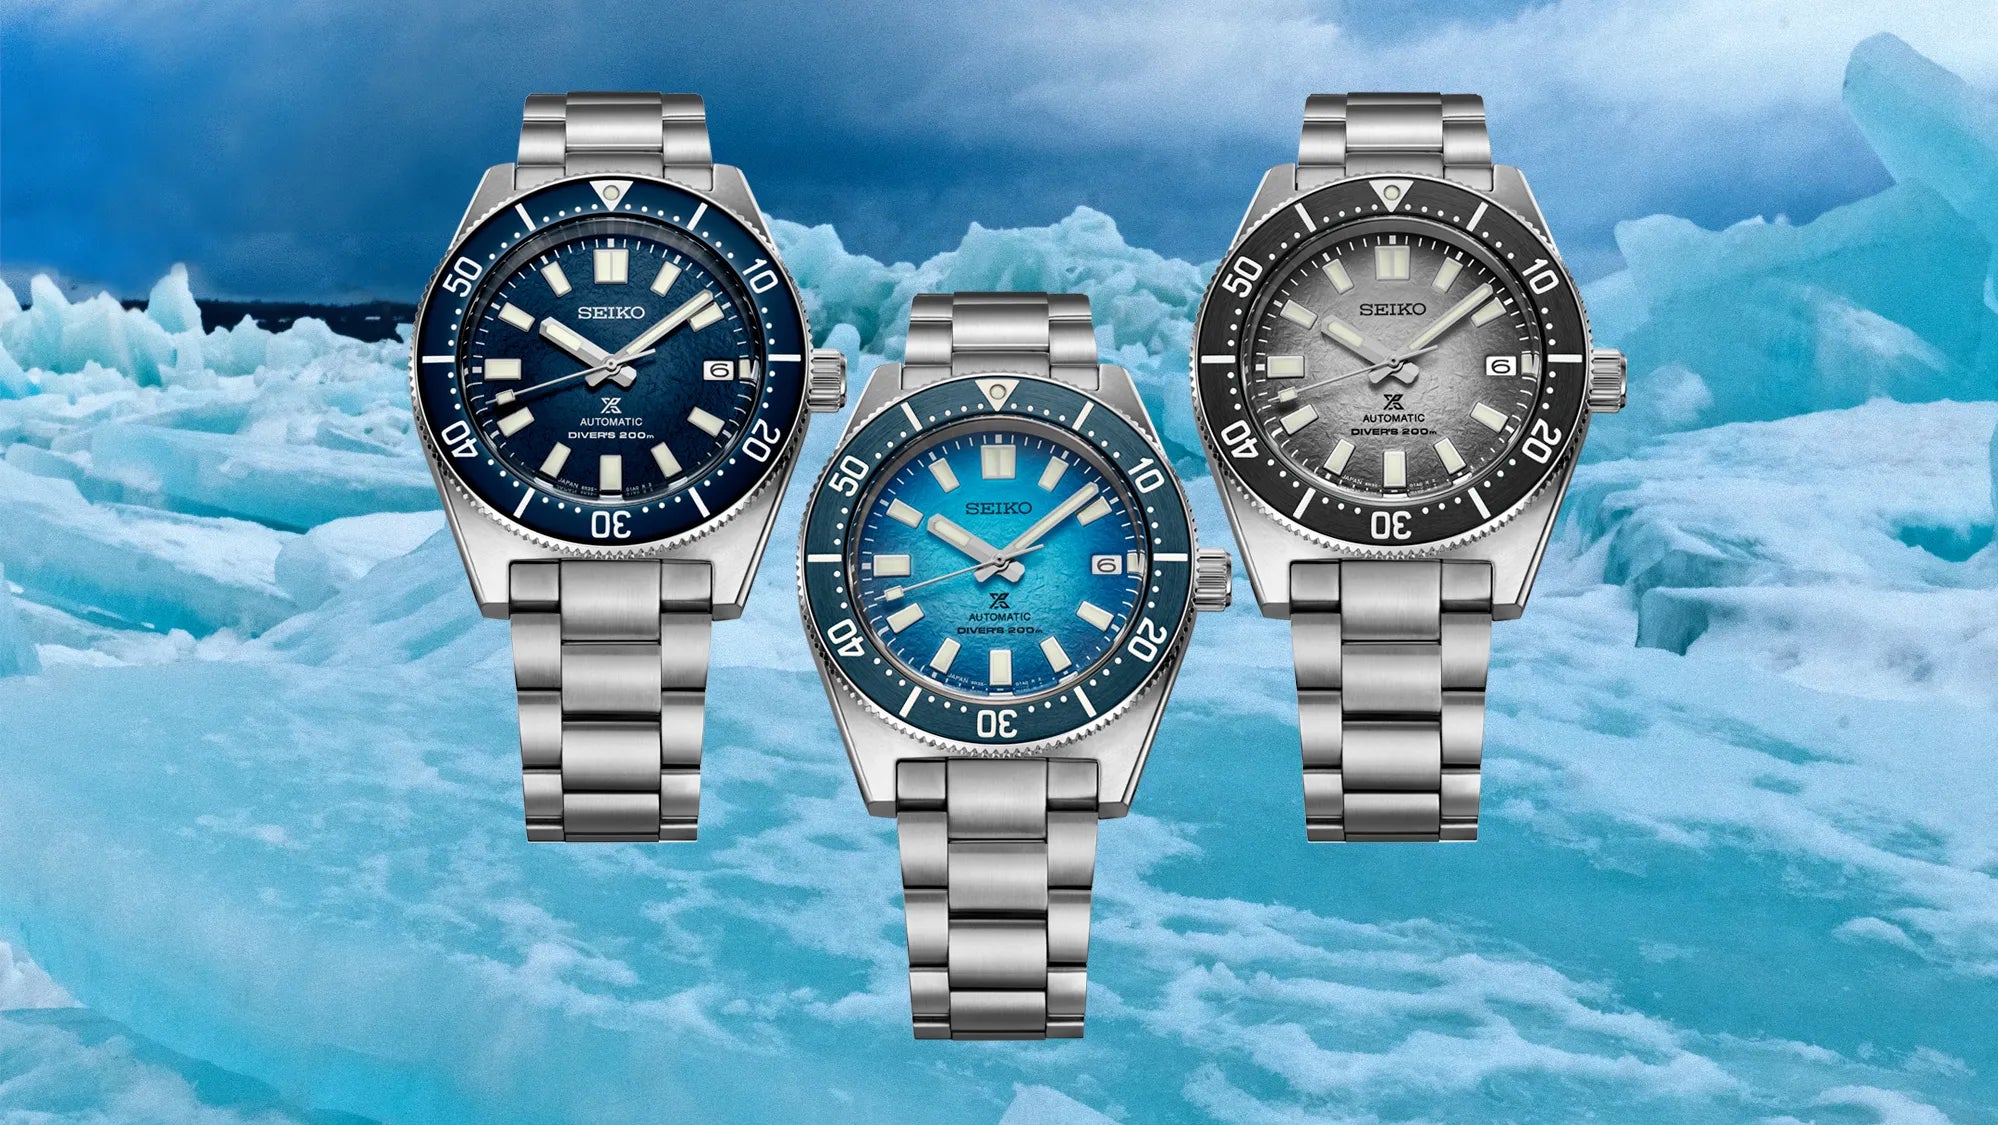 Seiko's Special Edition Prospex inspired by American cold-water diving locations